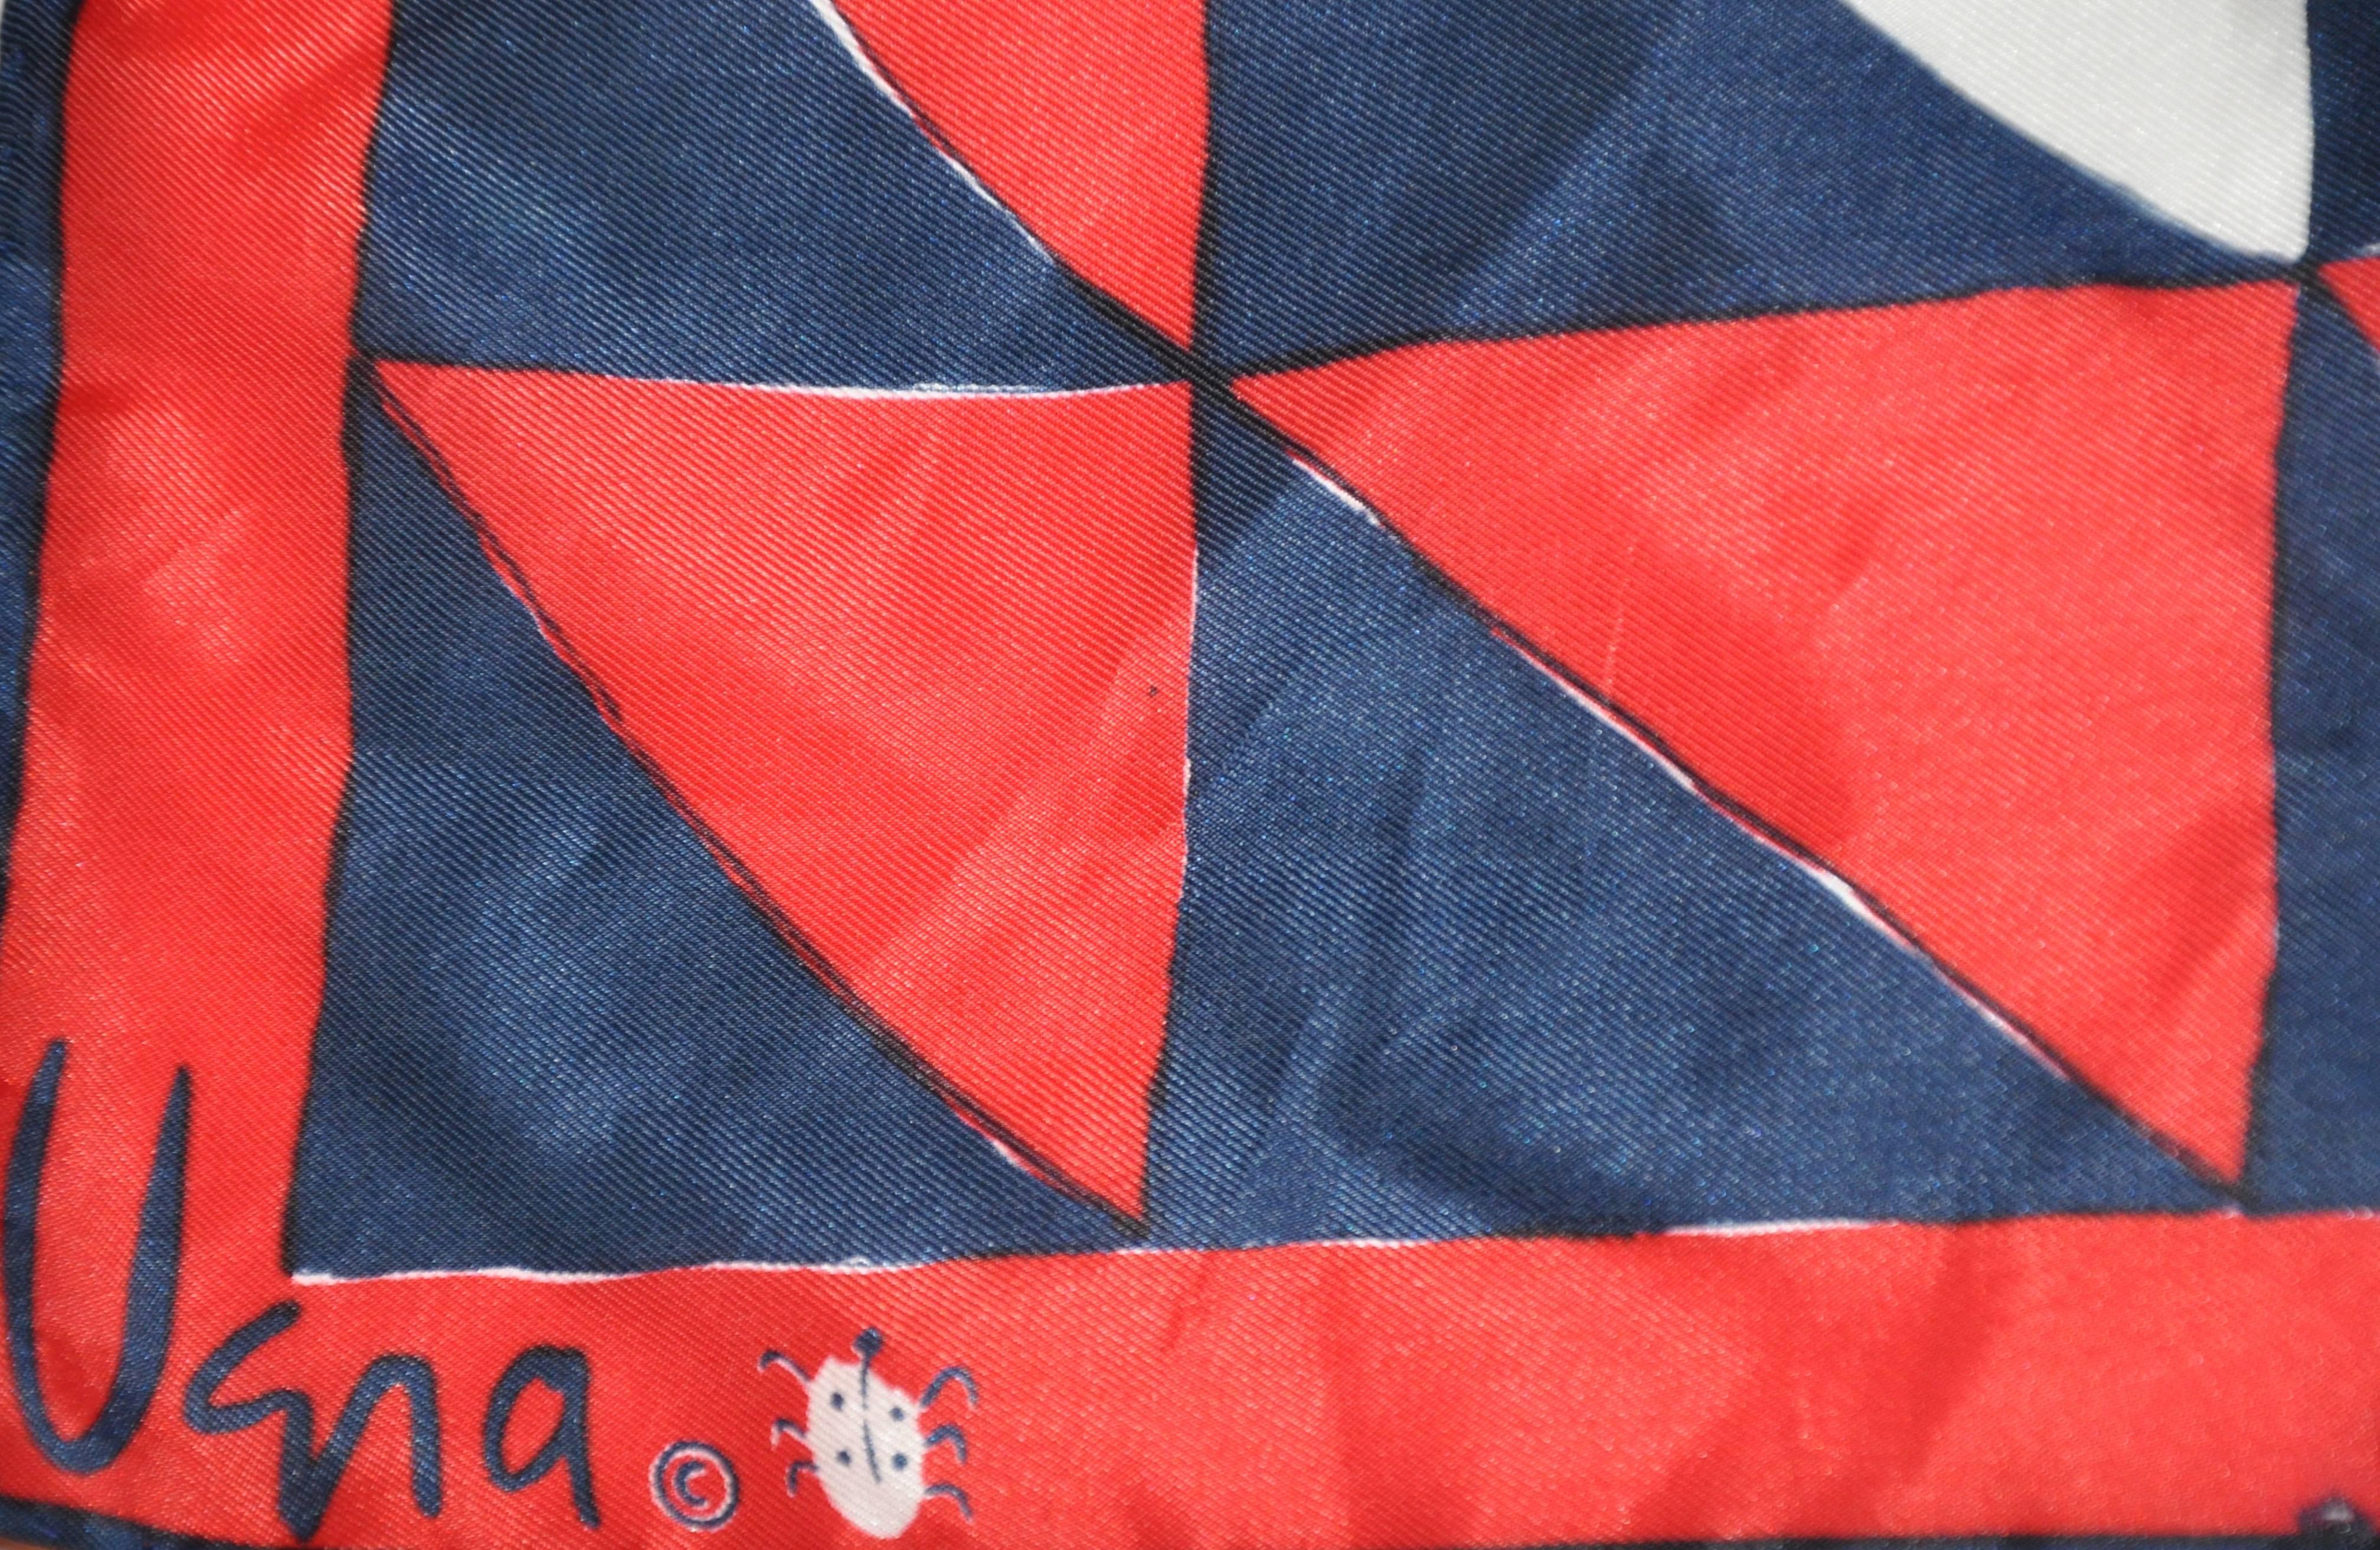 Vera's red, white and blue "Triangle Print" silk scarf measures 22" x 22", finished with hand-rolled edges. Made in Japan.